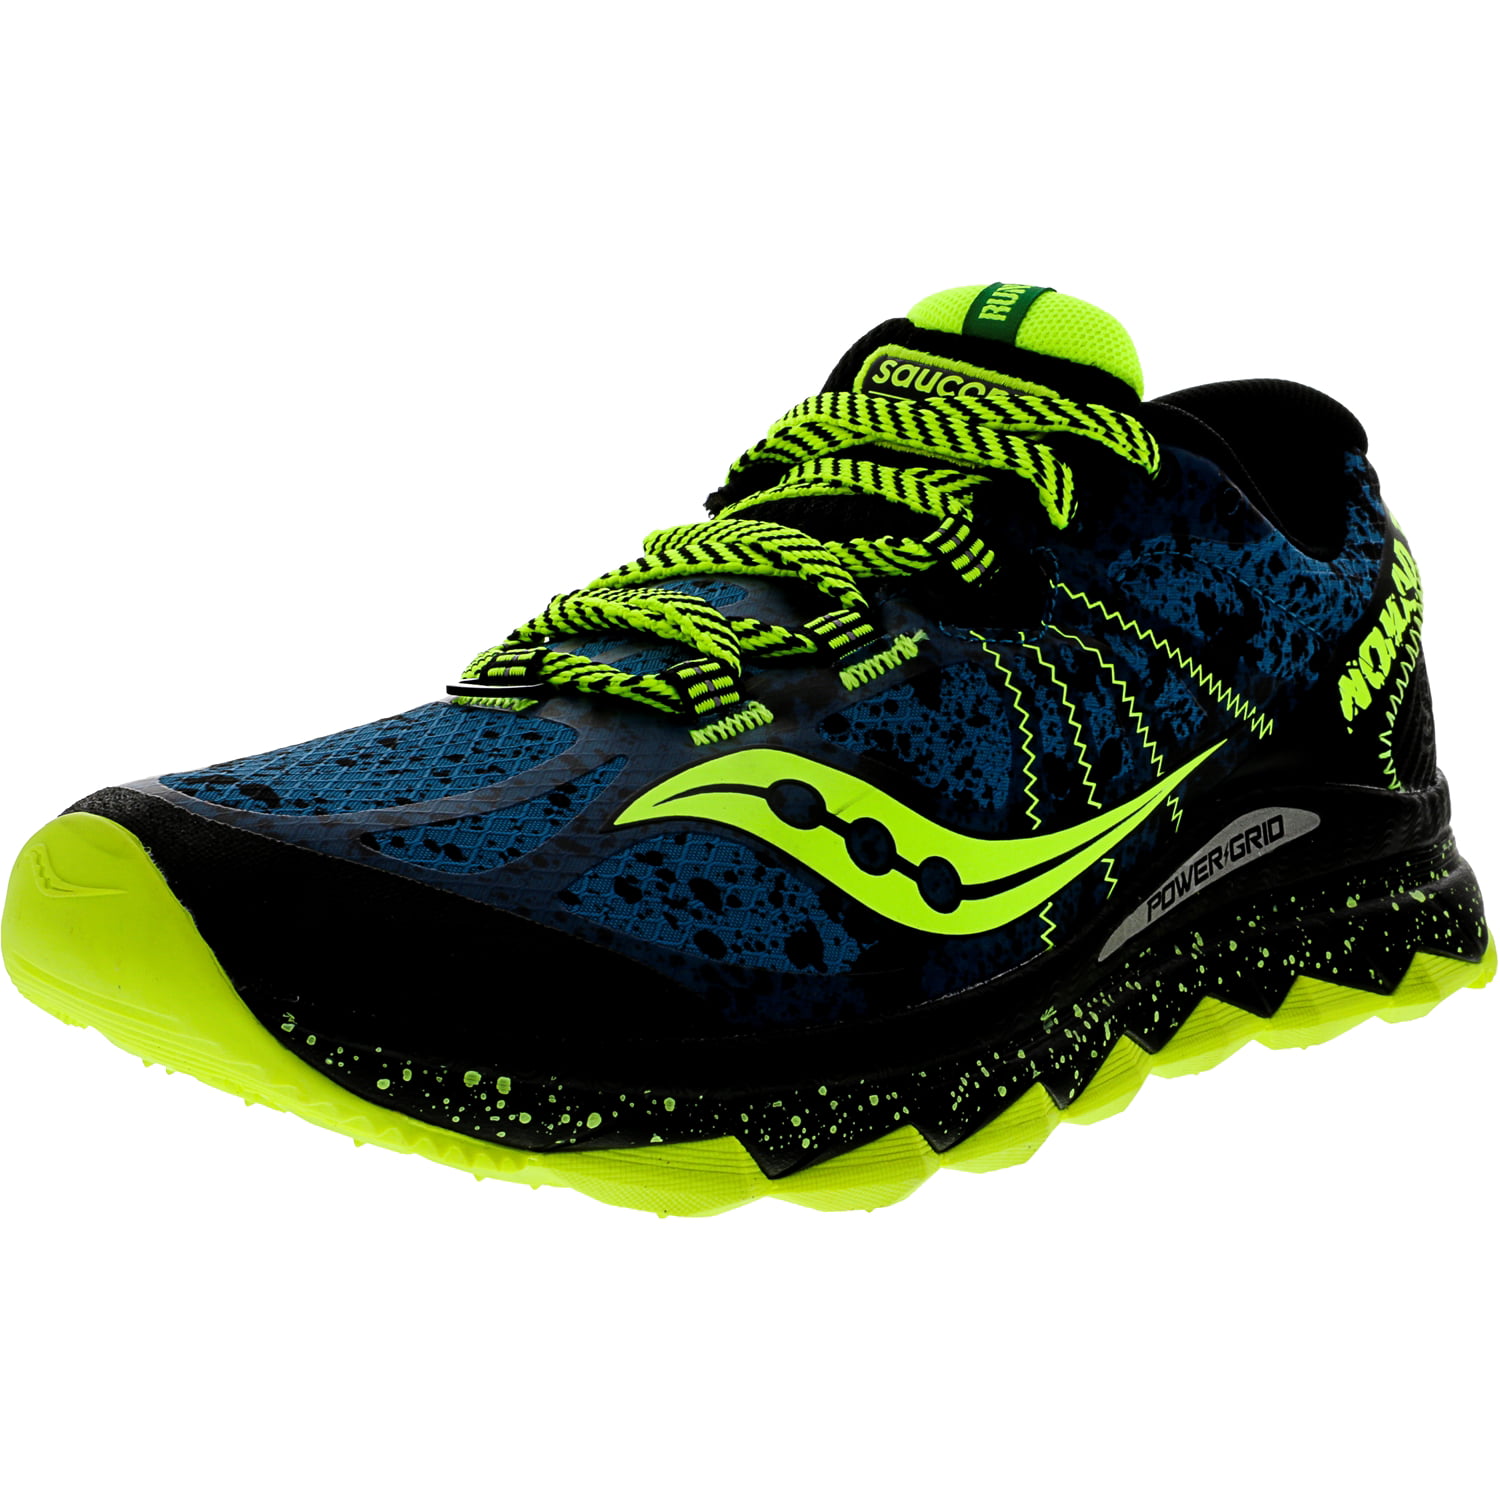 Nomad Tr Deep Water / Citron Ankle-High 